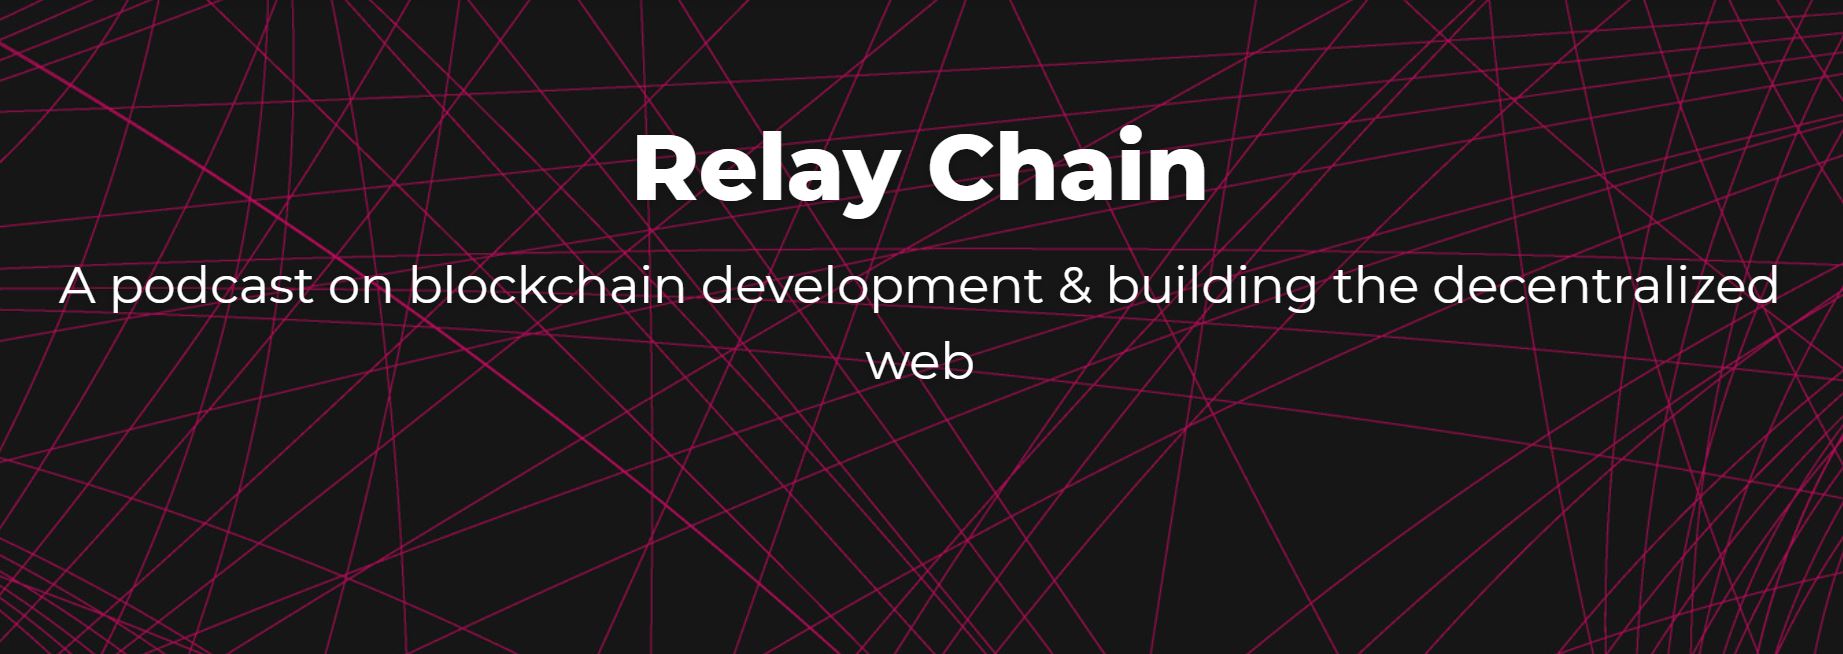 The Relay Chain